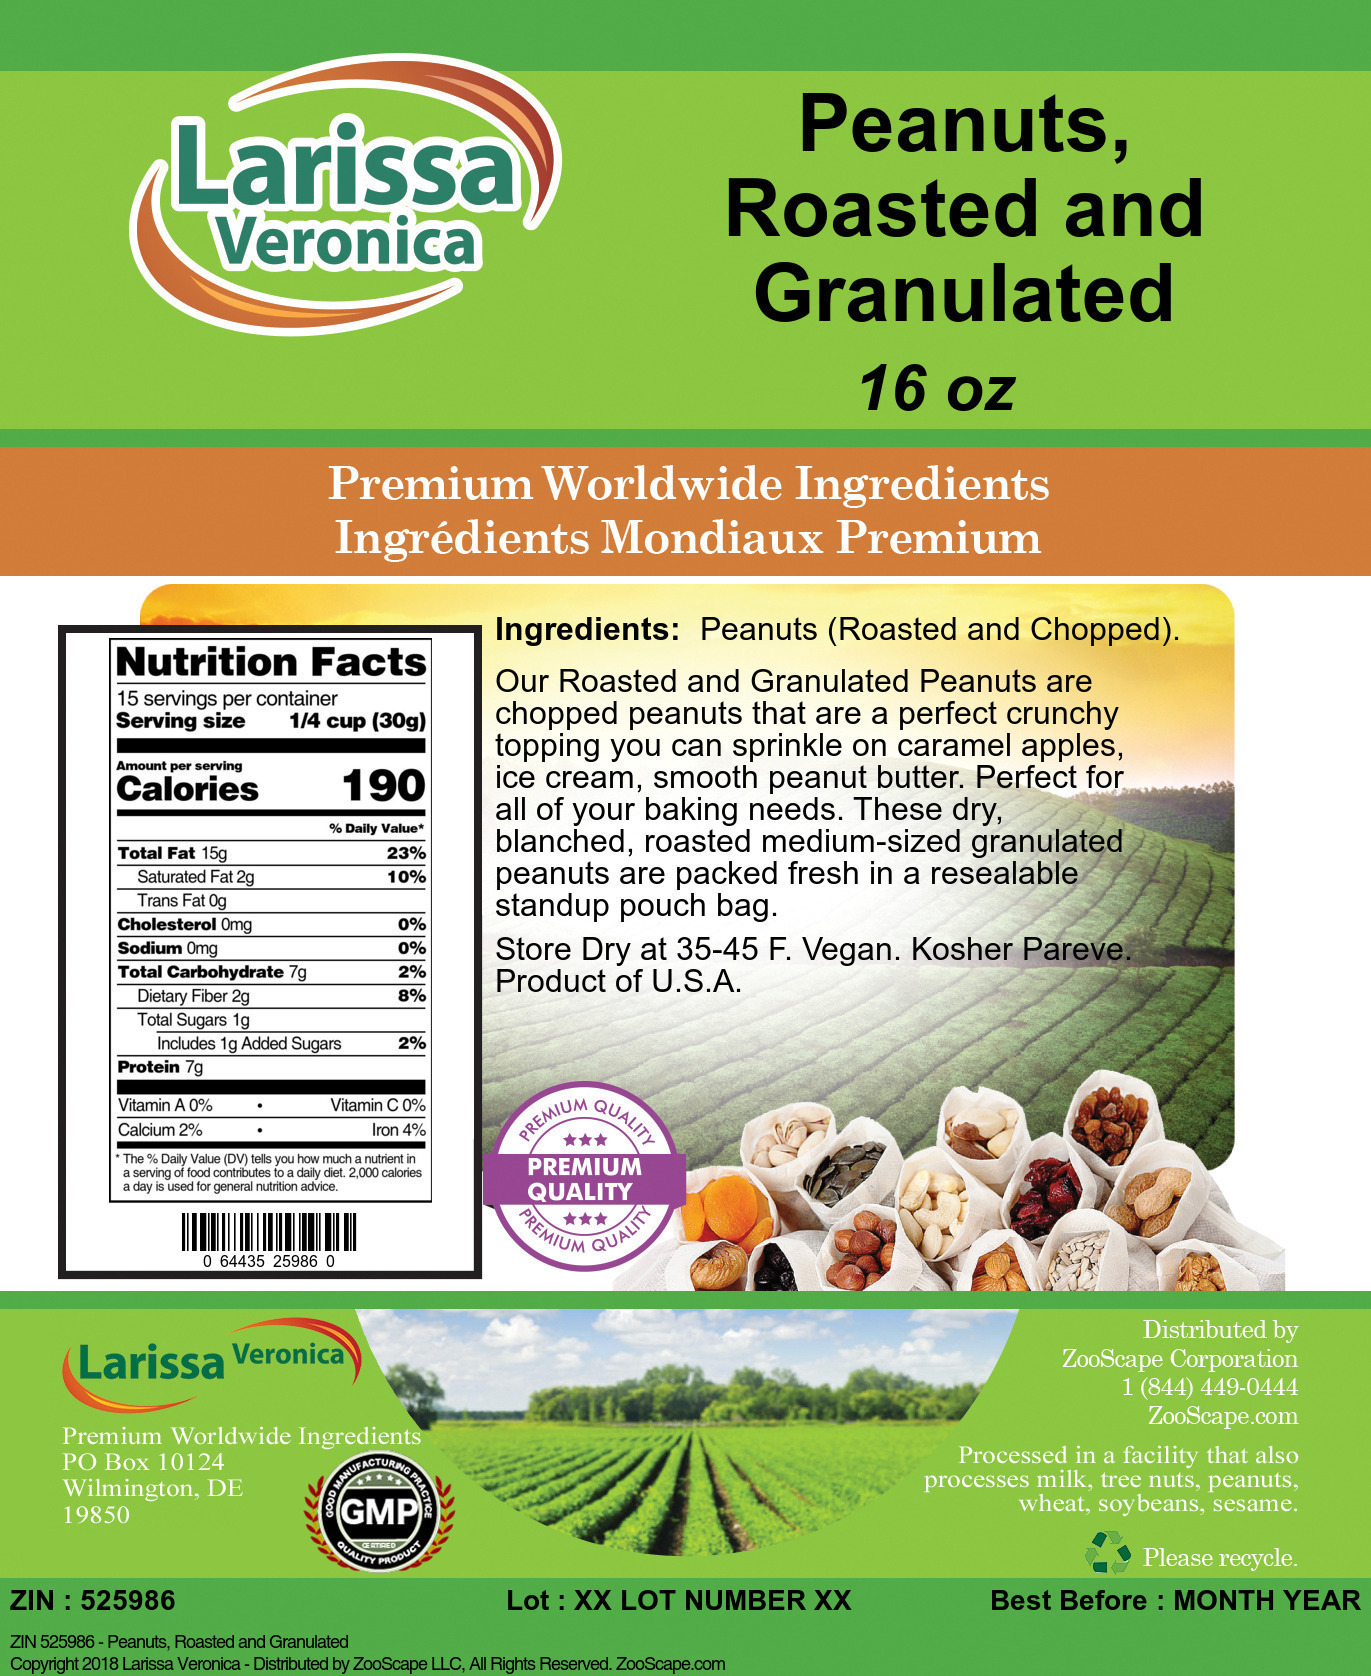 Peanuts, Roasted and Granulated - Label